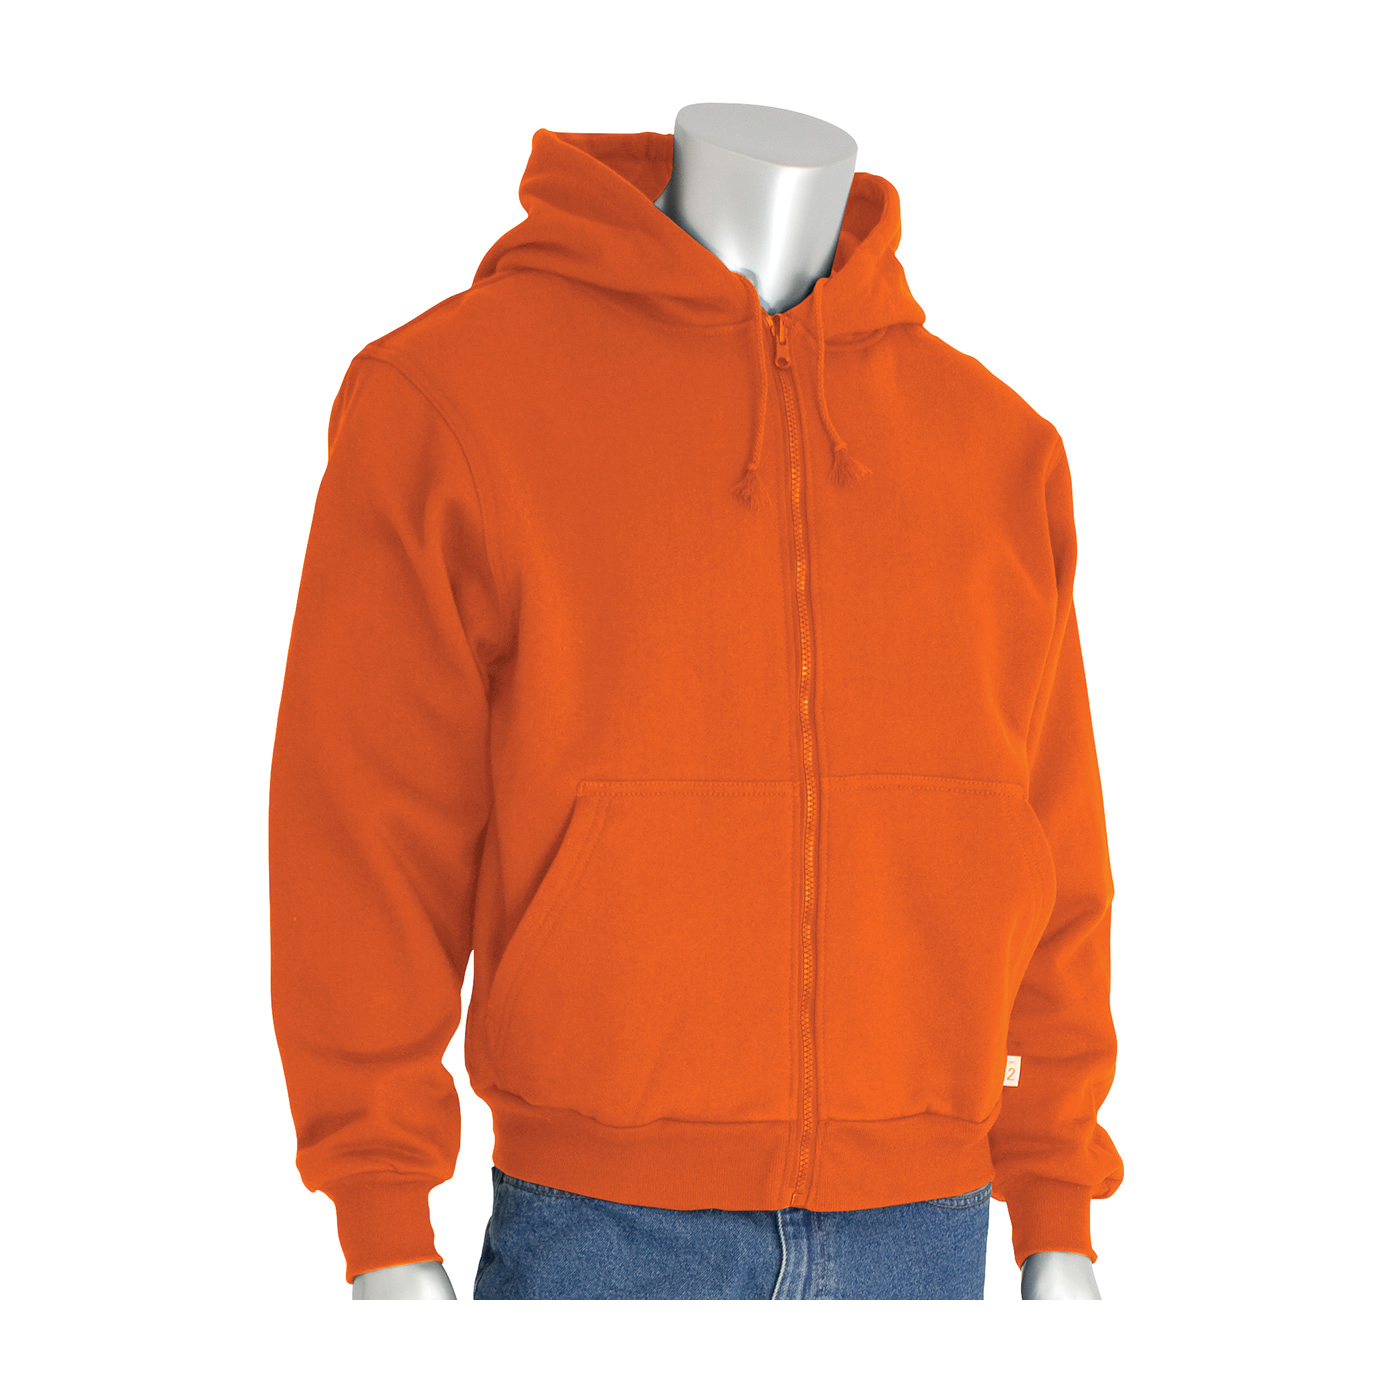 PIP® 385-FRZH-OR/L Polartec® 385-FRZH Arc and Flame Resistant Sweatshirt, L, Orange, FR Fleece Knit/100% Cotton, 28-1/2 in Regular, 29-1/2 in Tall L